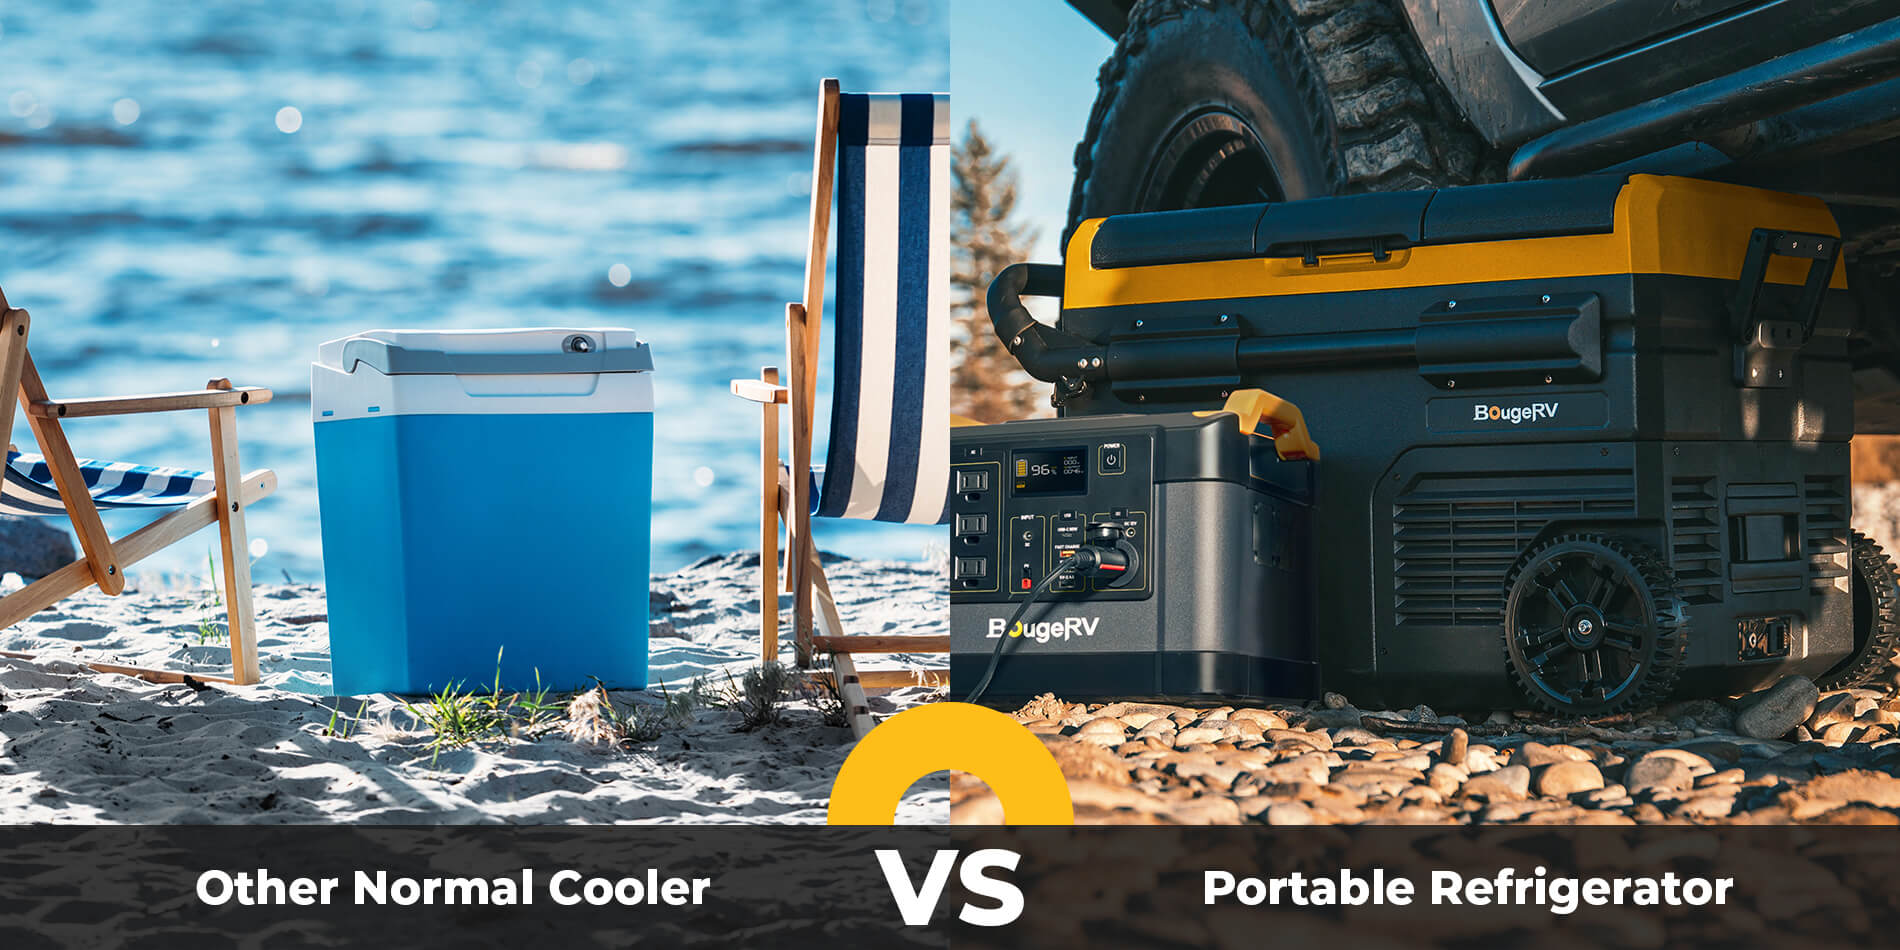 Cooler VS Portable Refrigerator: Which is better?